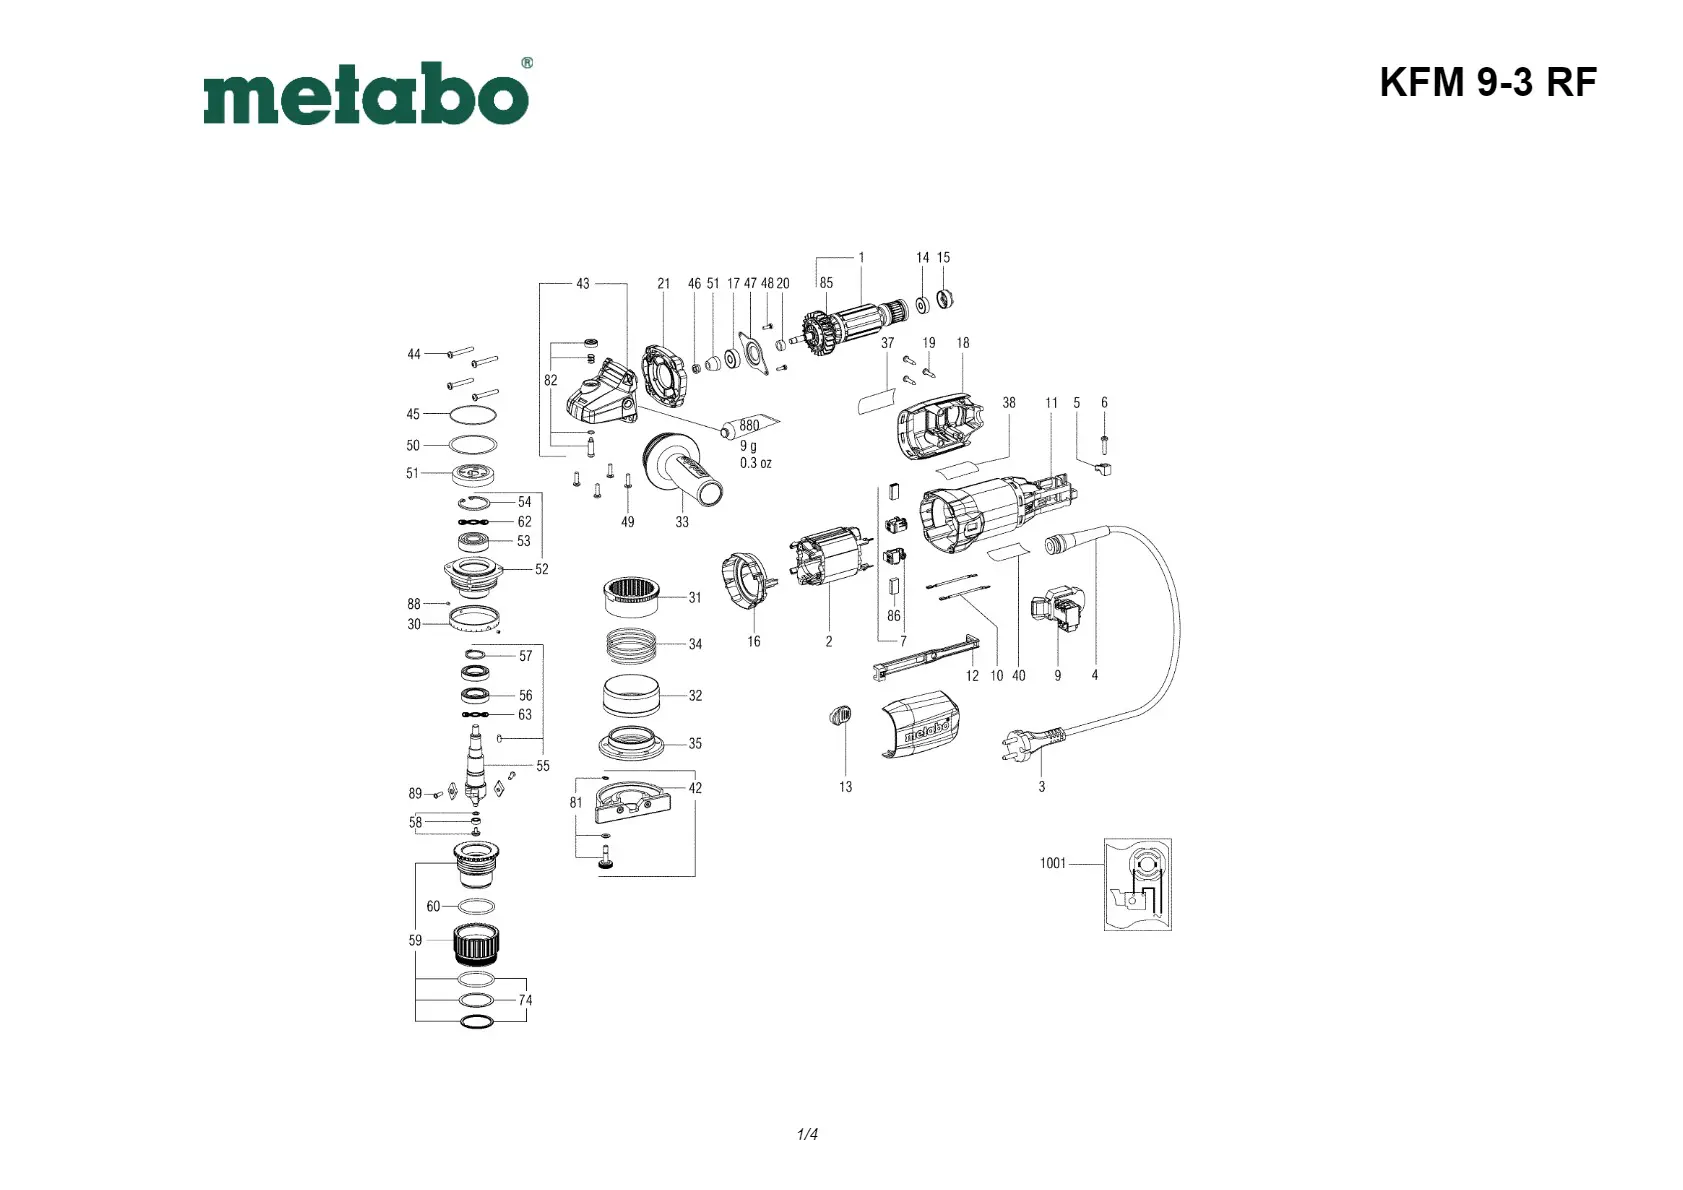 Metabo Part not needed